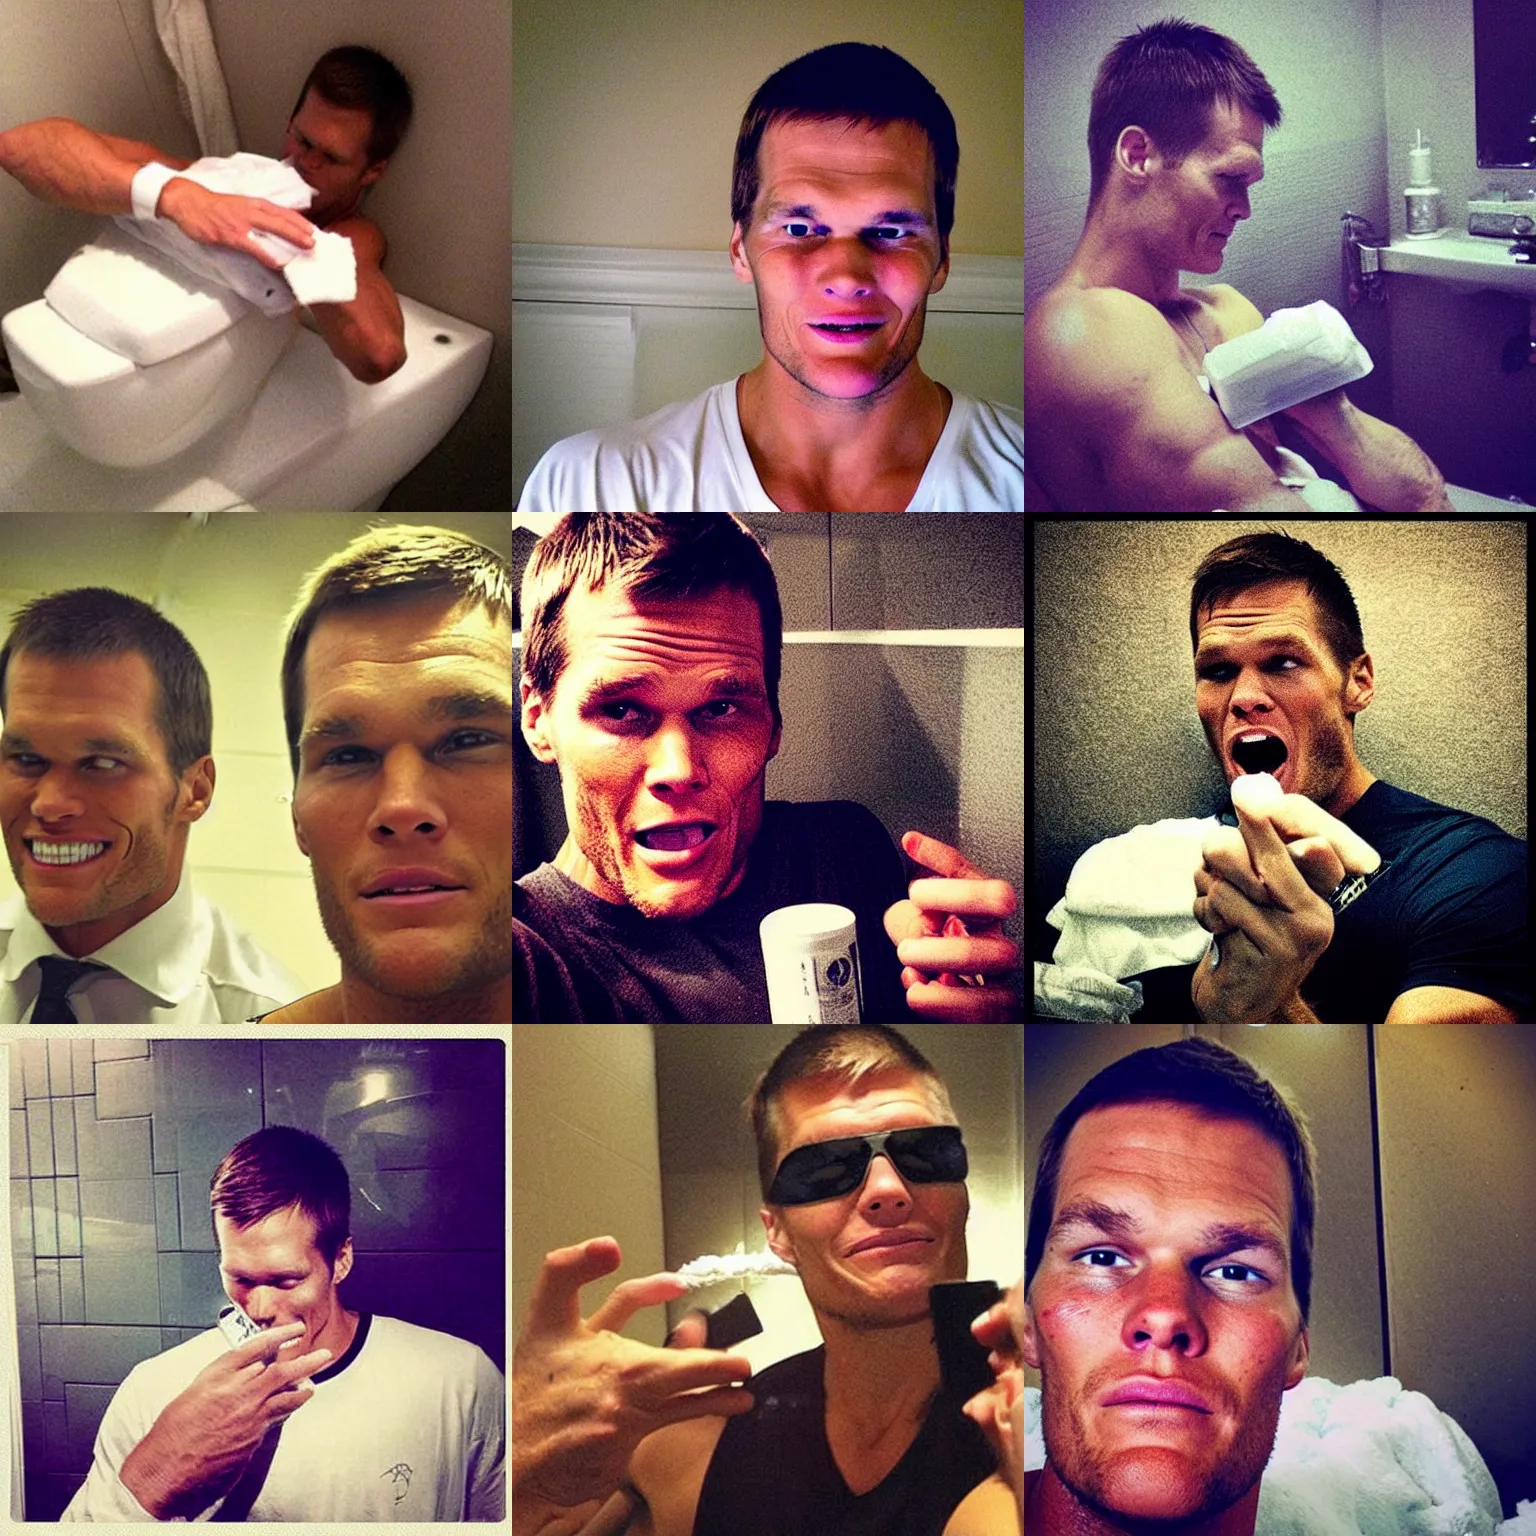 Prompt: Tom Brady snorting cocaine in a bathroom, 2013 Instagram post